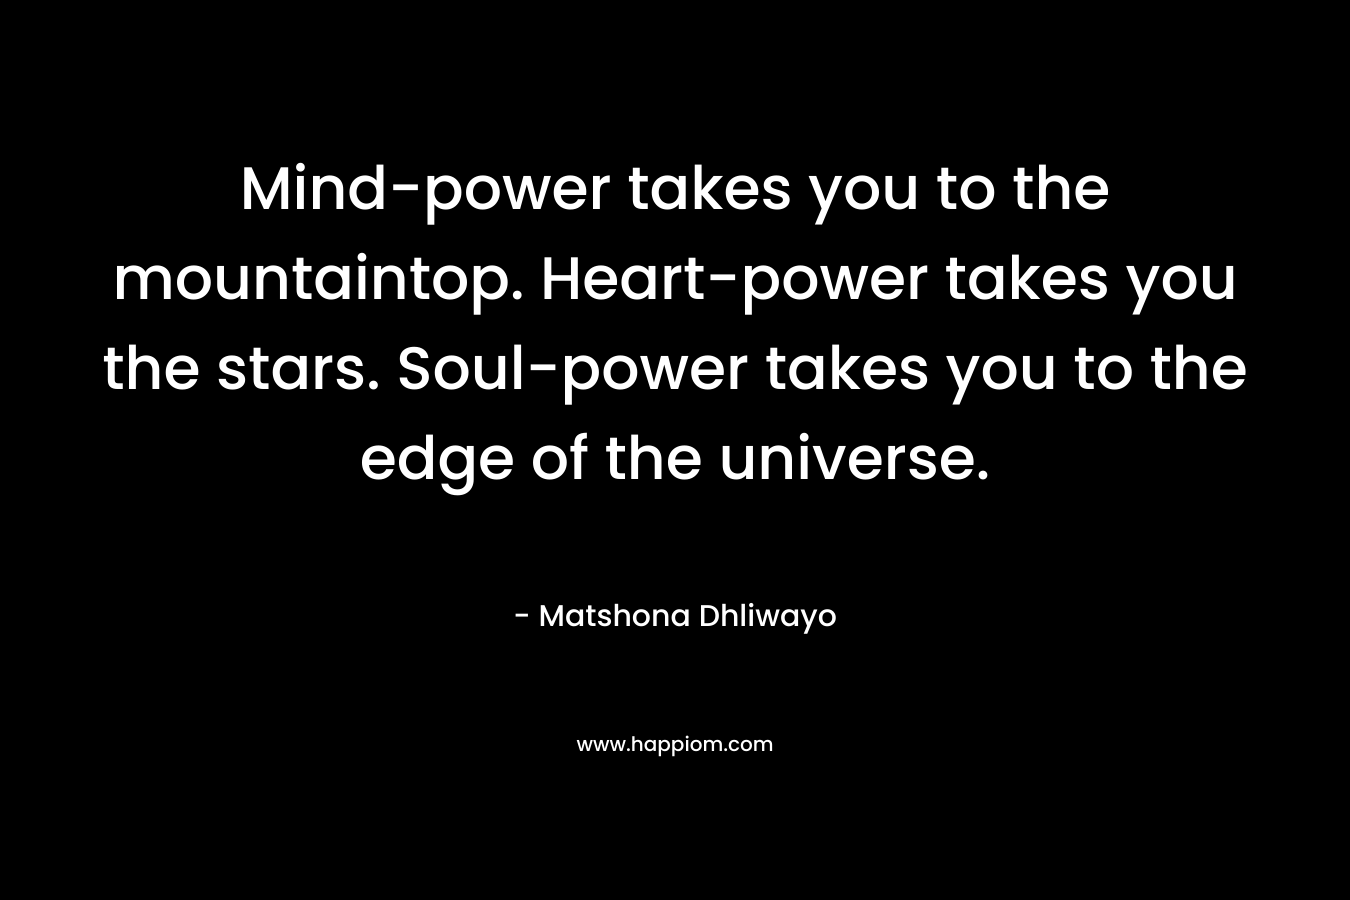 Mind-power takes you to the mountaintop. Heart-power takes you the stars. Soul-power takes you to the edge of the universe. – Matshona Dhliwayo